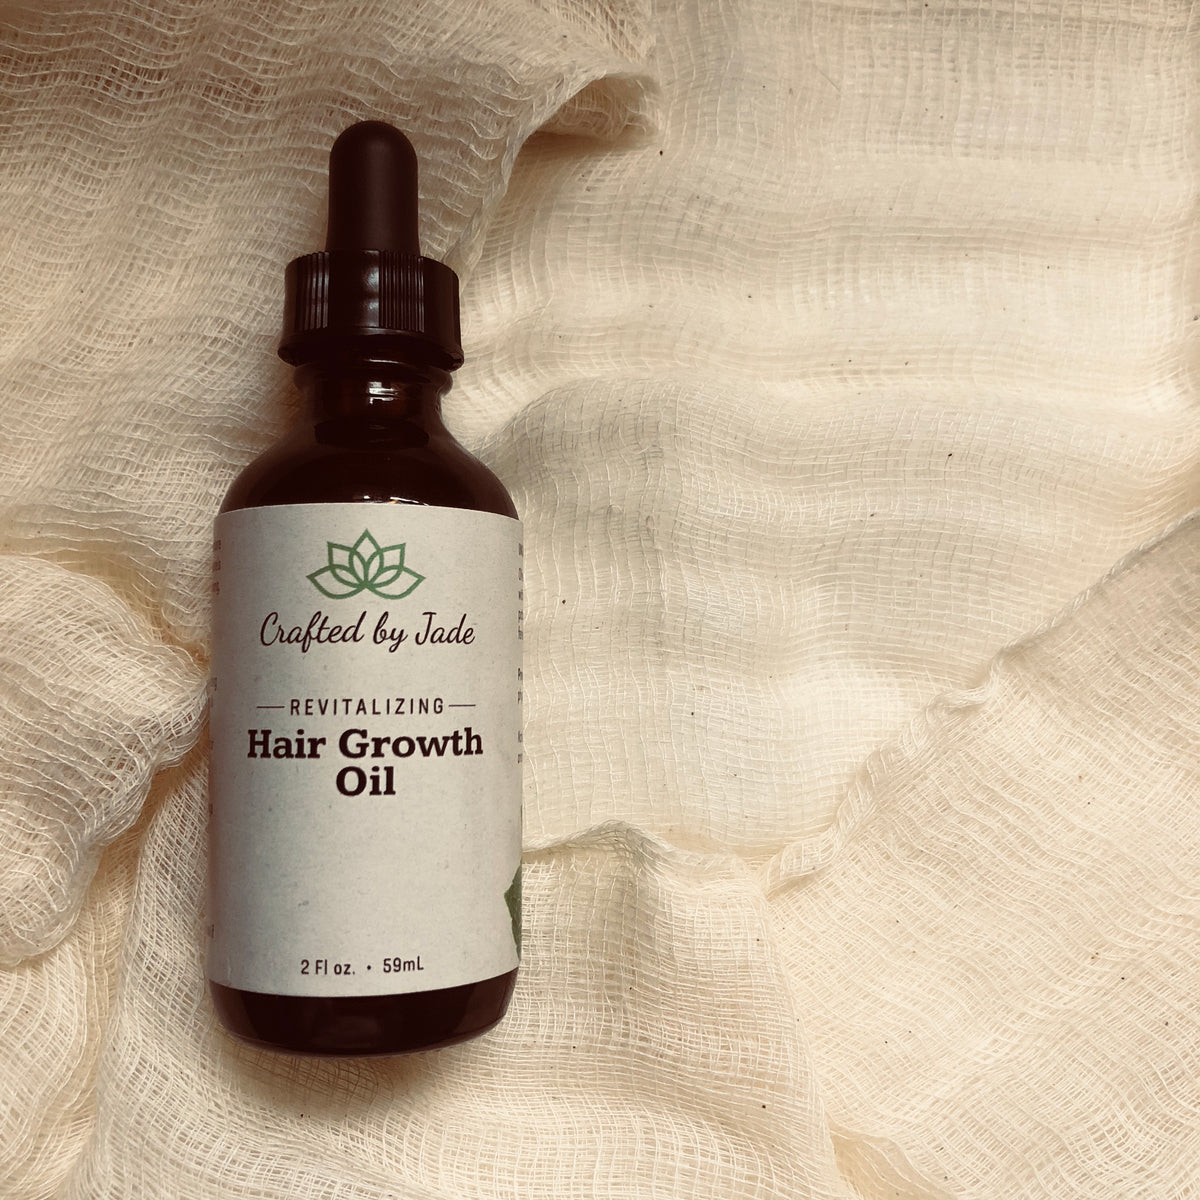 Revitalizing Hair Growth Oil – Crafted By Jade